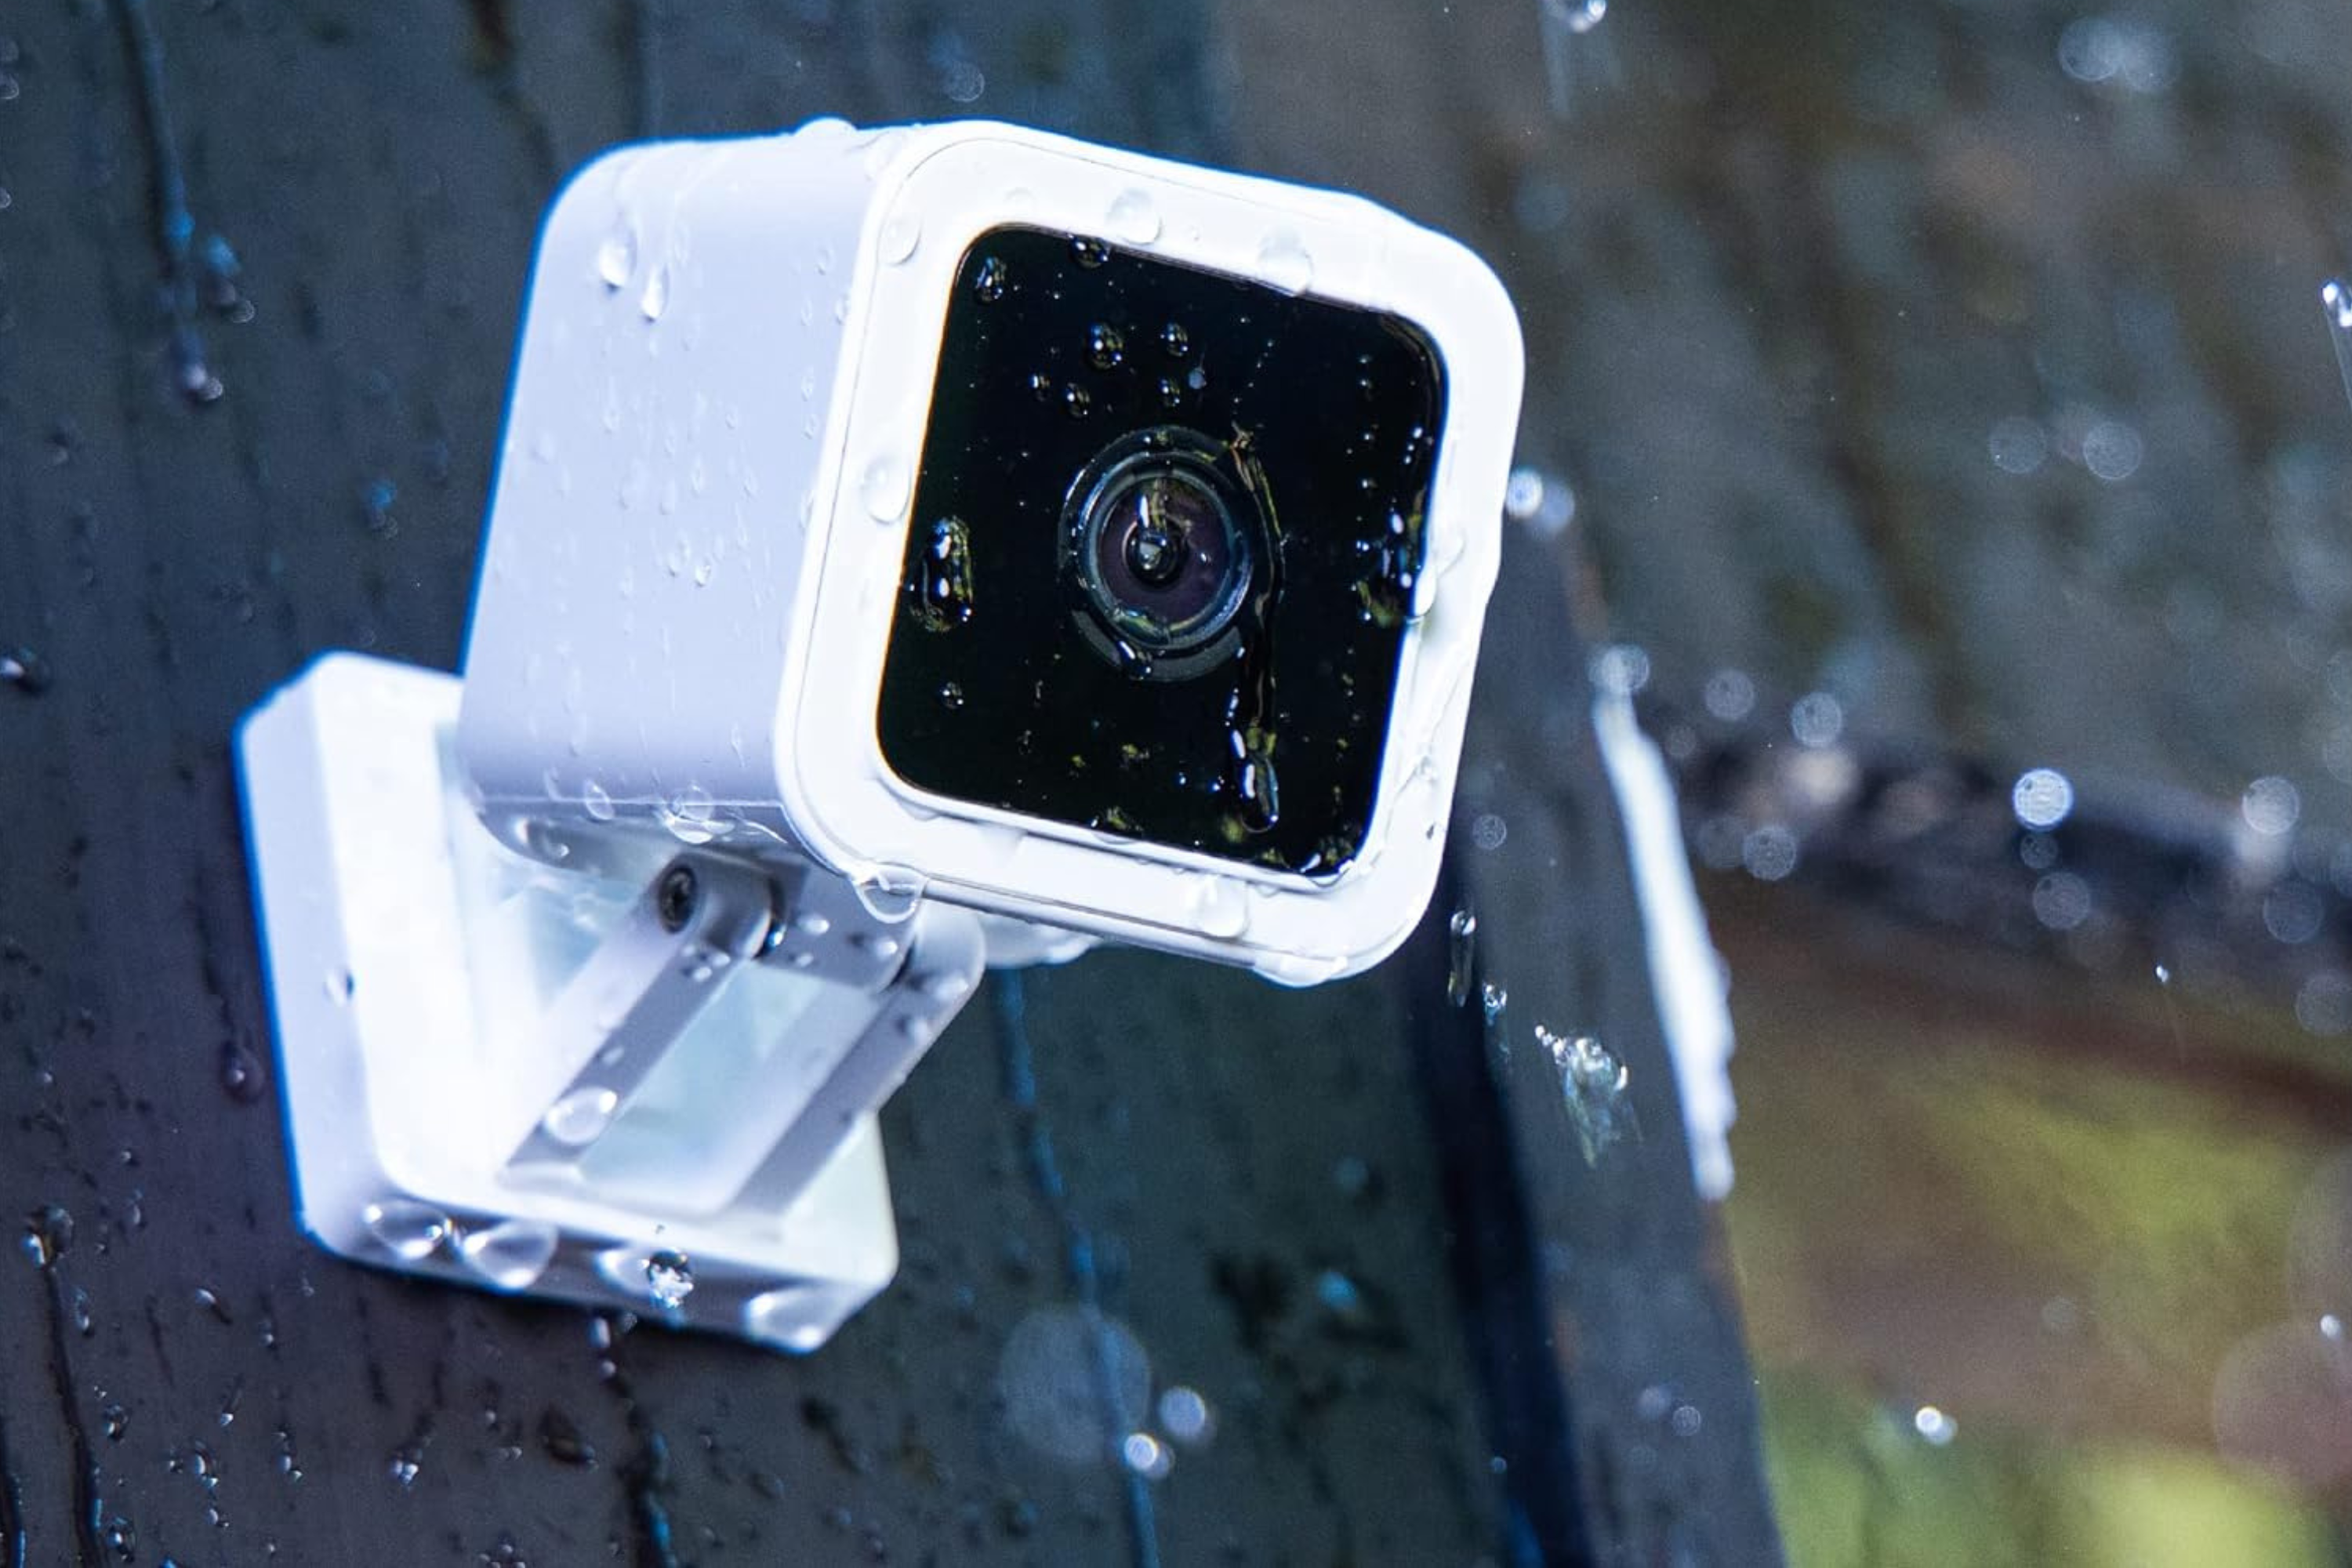 Wyze Cam v3 is now 52% off in this limited-time deal